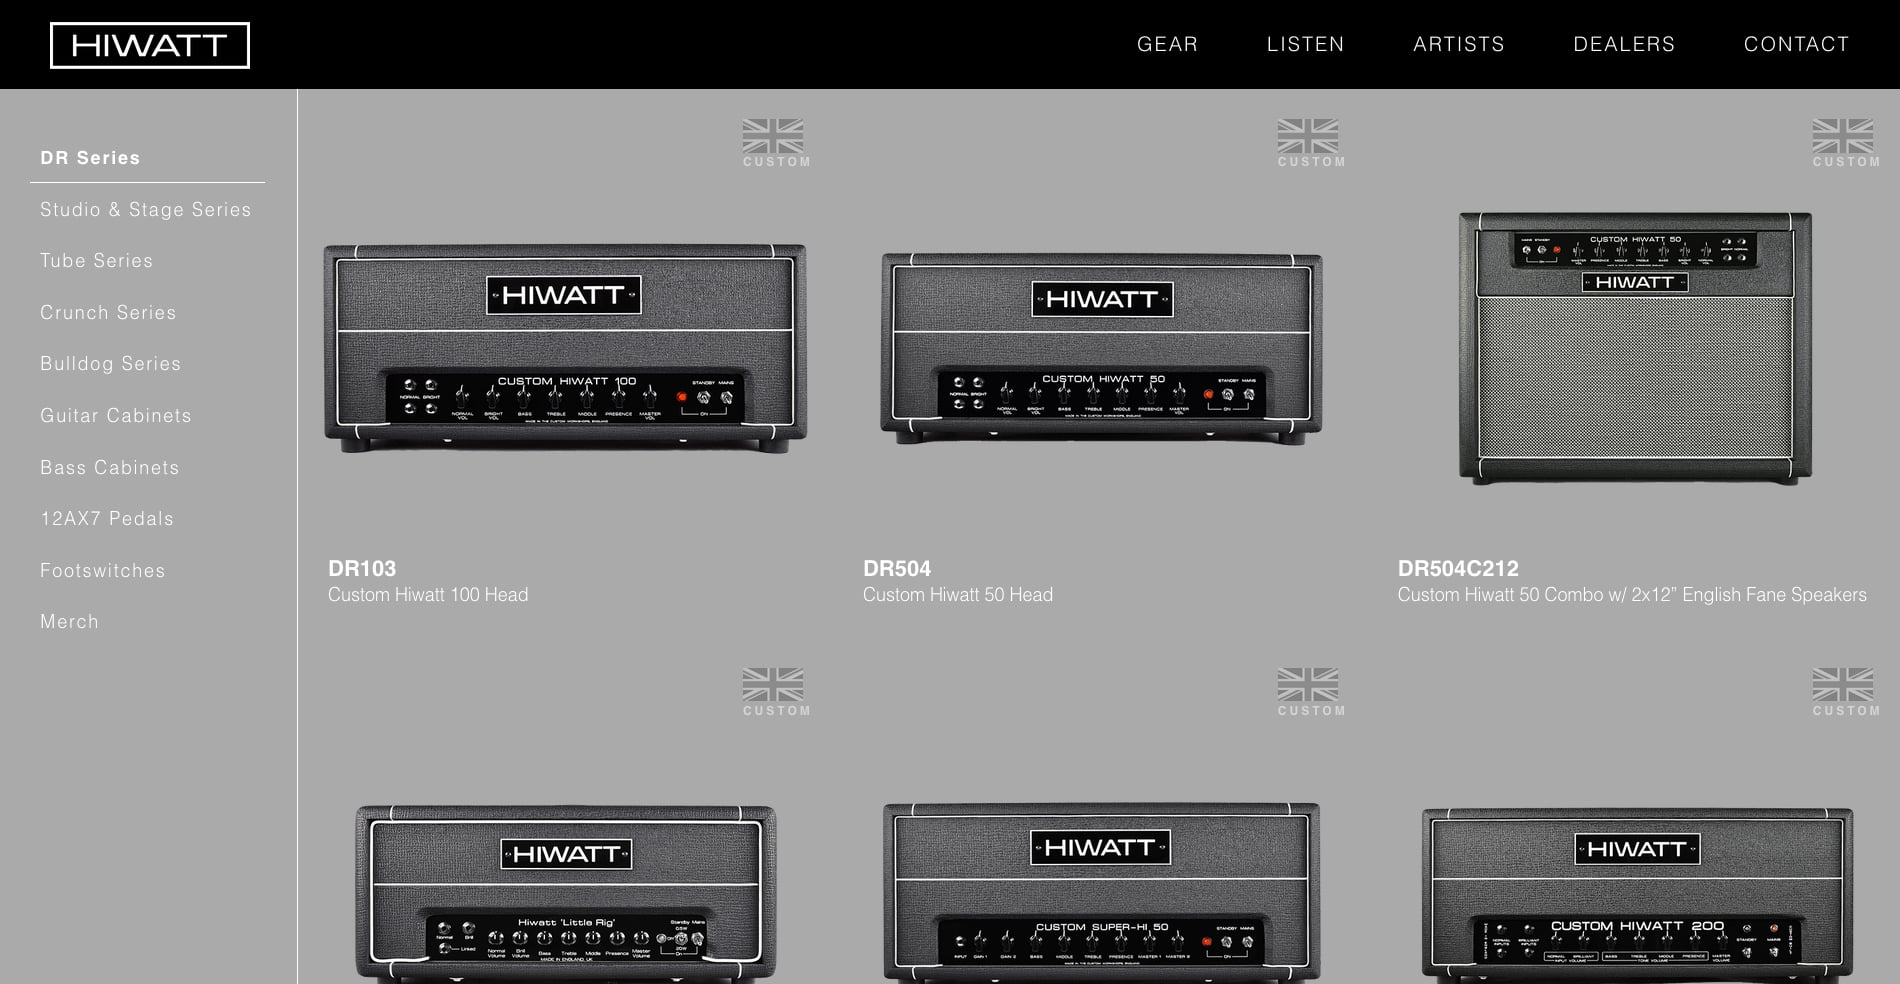 depicting a  layout designed and developed for hand-wired amplifier manufacturer Hiwatt. The website is hosted at hiwatt.co.uk